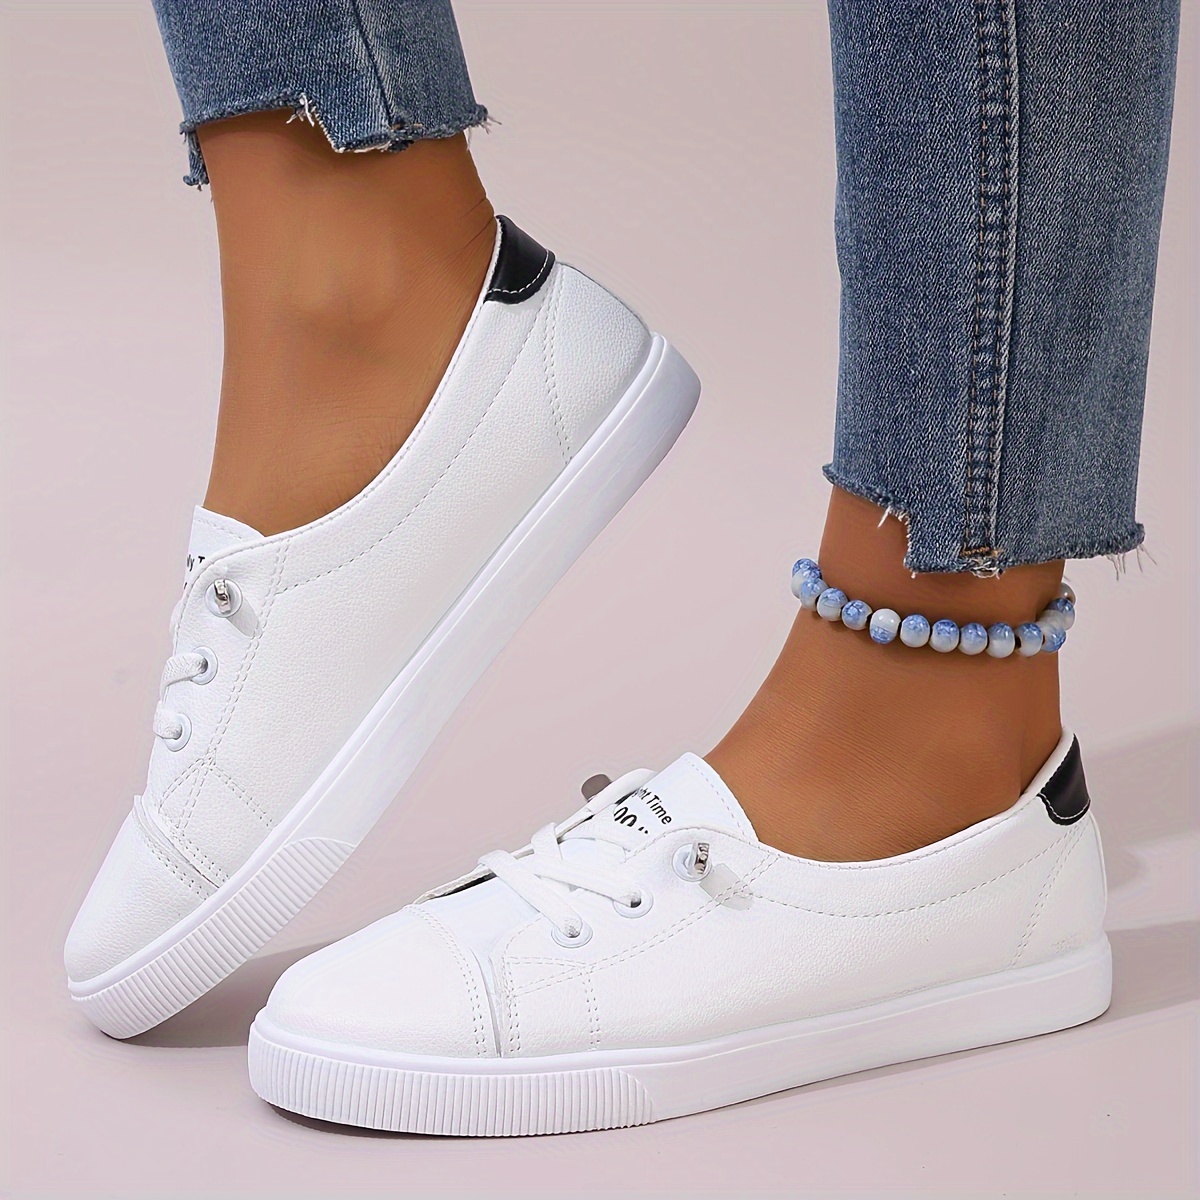 

Women's Solid Color Casual Sneakers, Slip On Lightweight Soft Sole Walking Flats, Low-top Comfort Daily Shoes